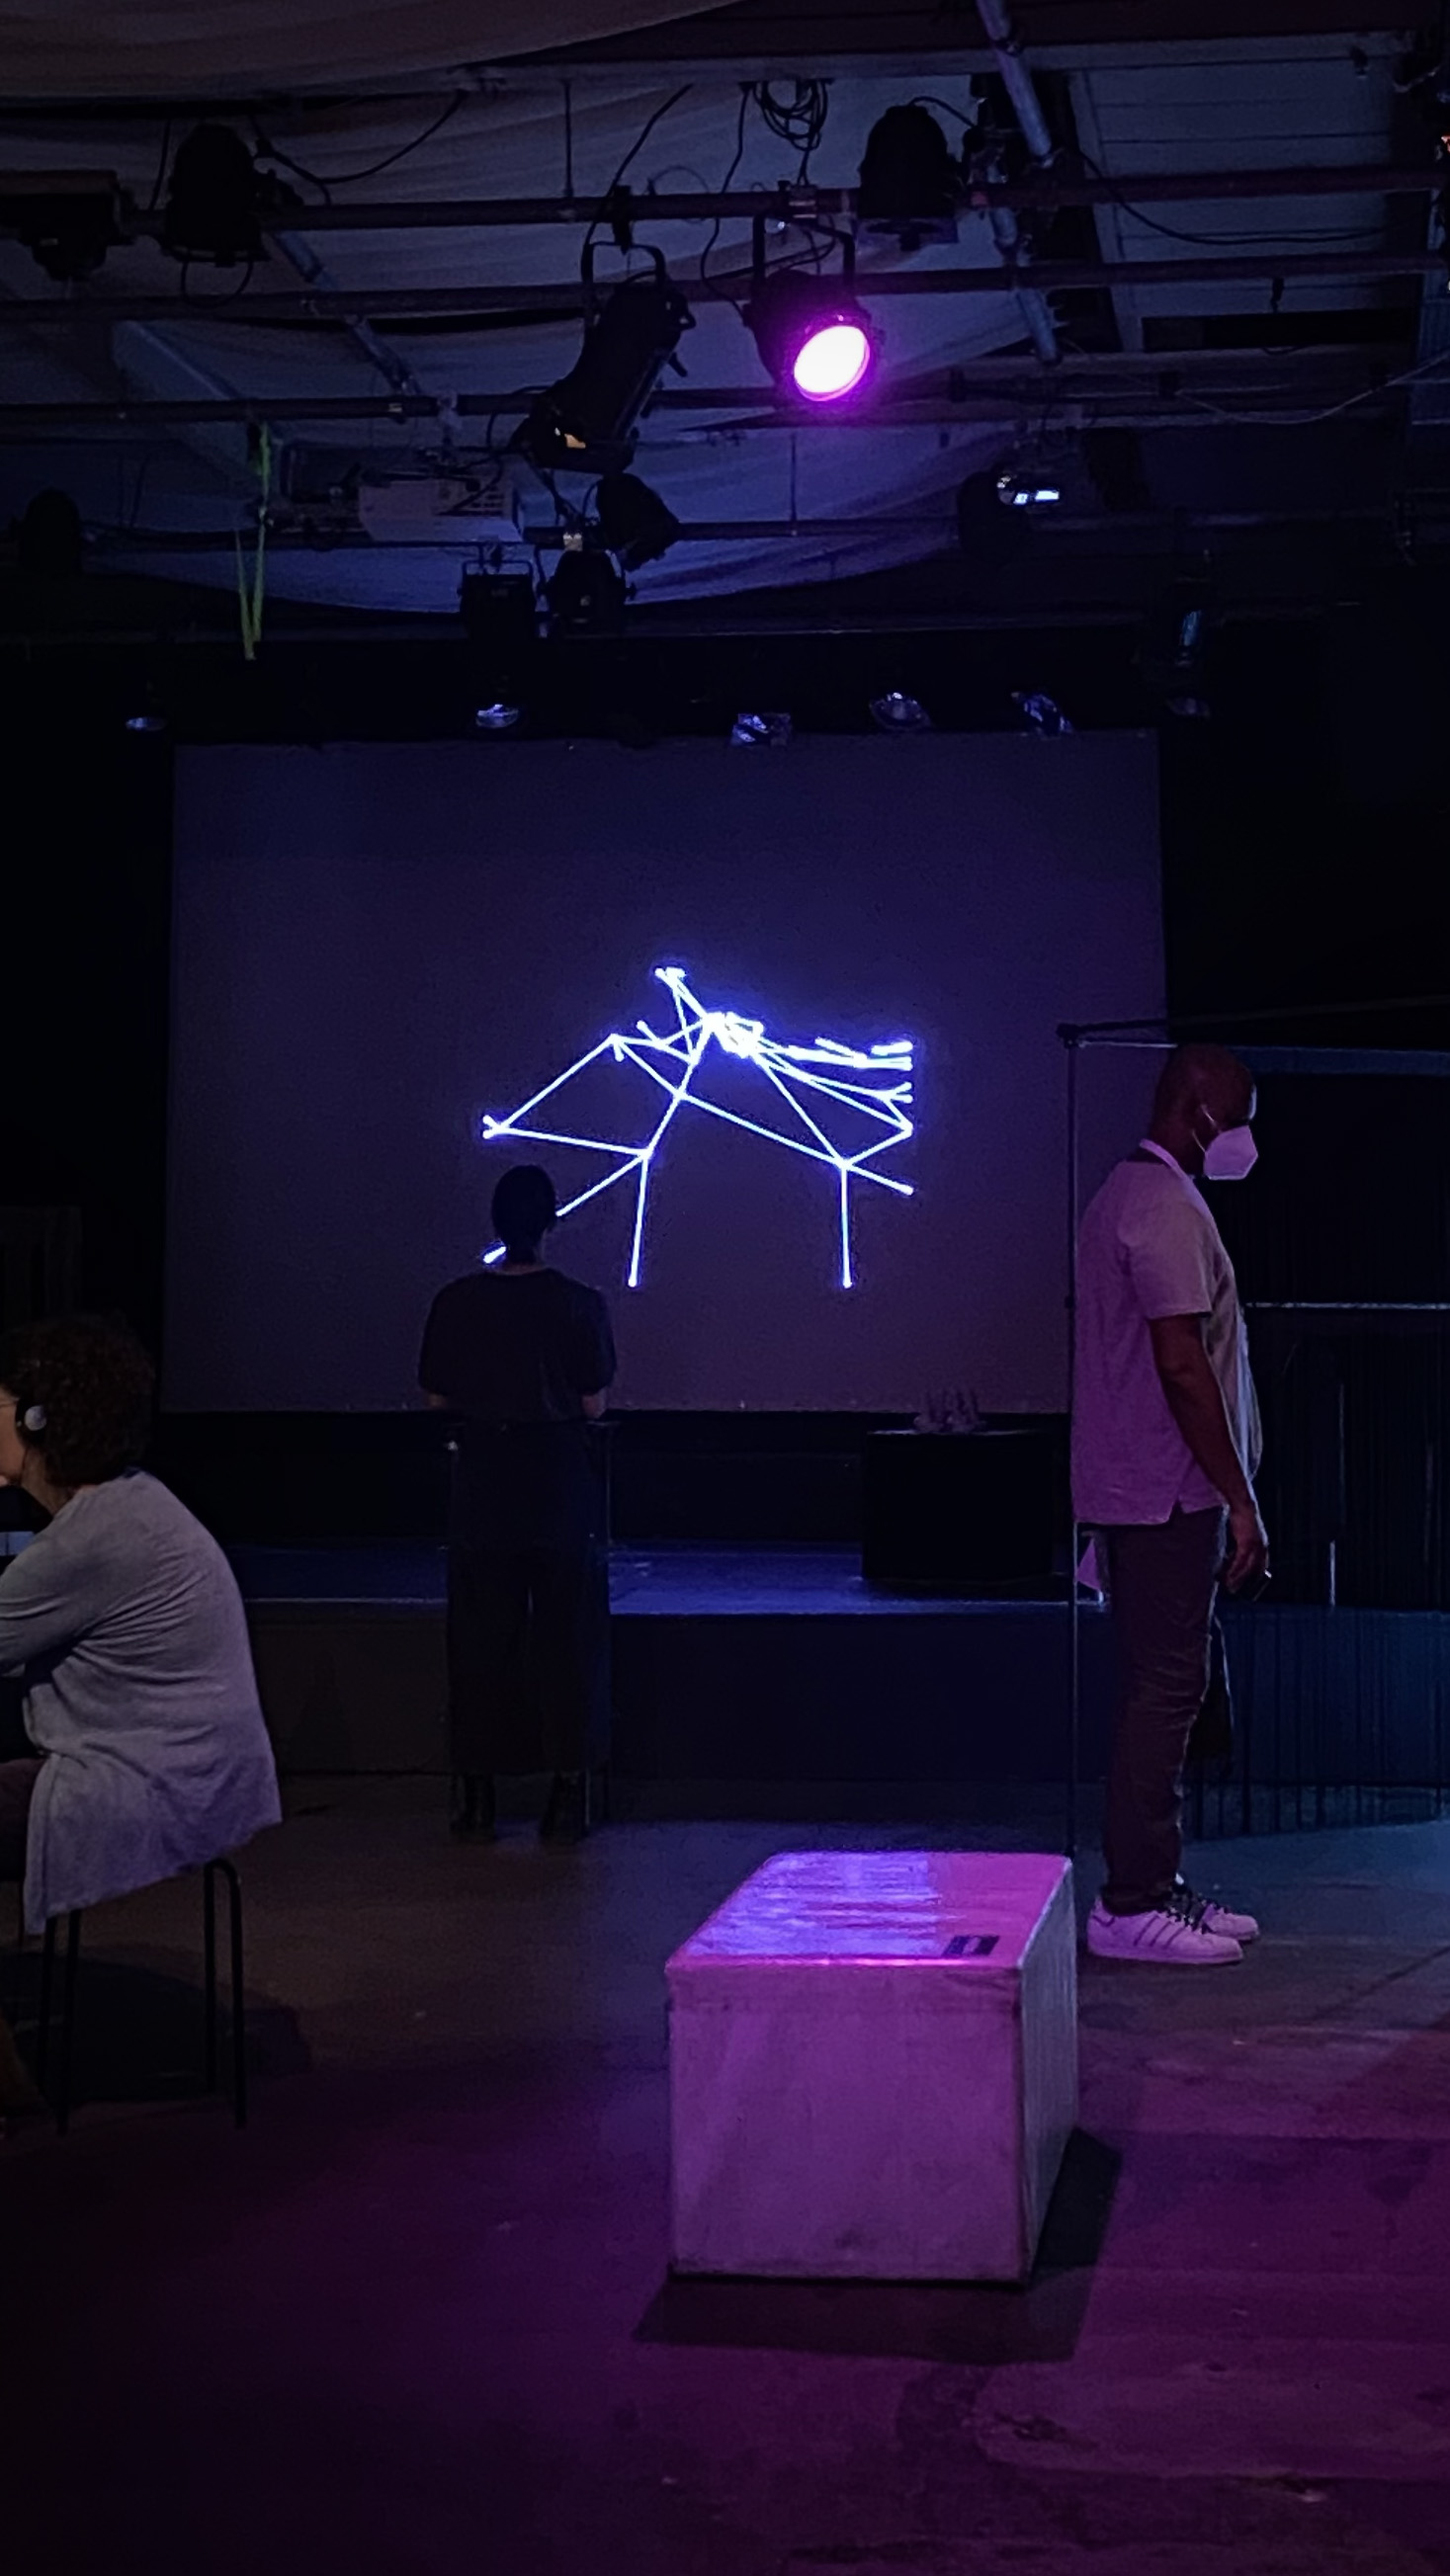 White abstract laser lines projected onto a screen on a stage. Purple lit room, people standing in front.